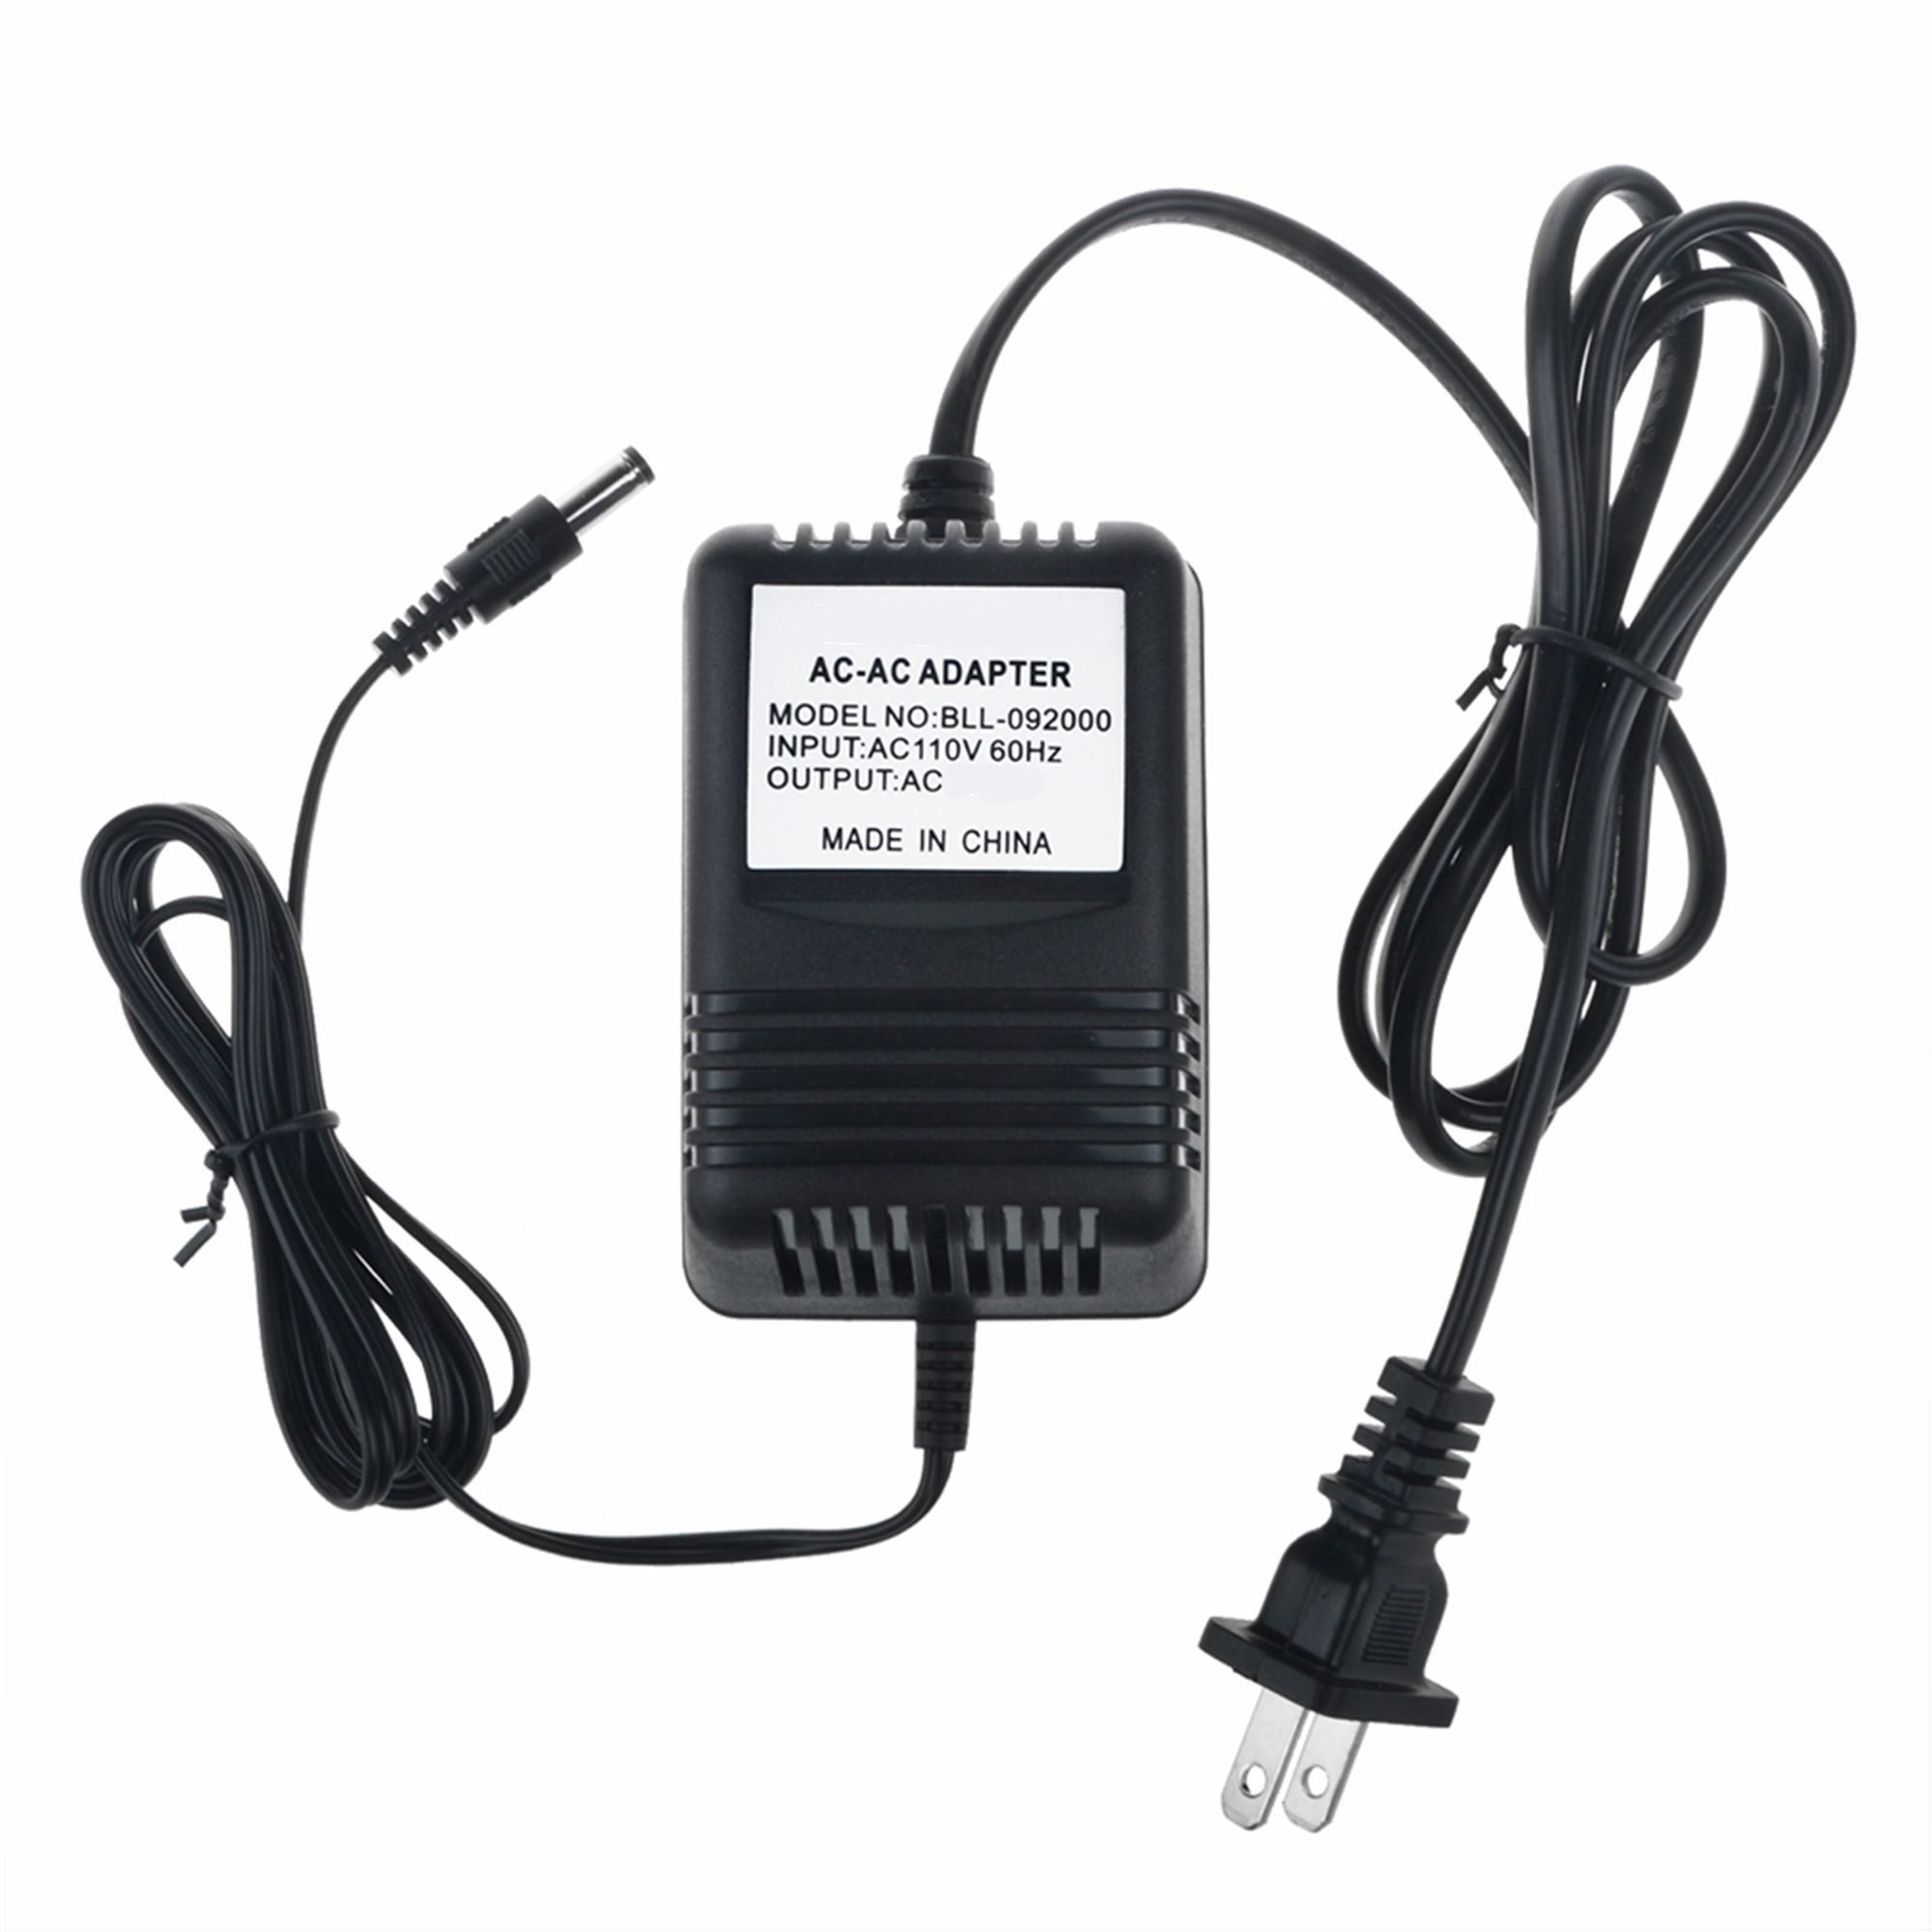 AC to AC Adapter for Vestax AC-14L AC14L Mixing Controller DJ Mixer Power Supply 